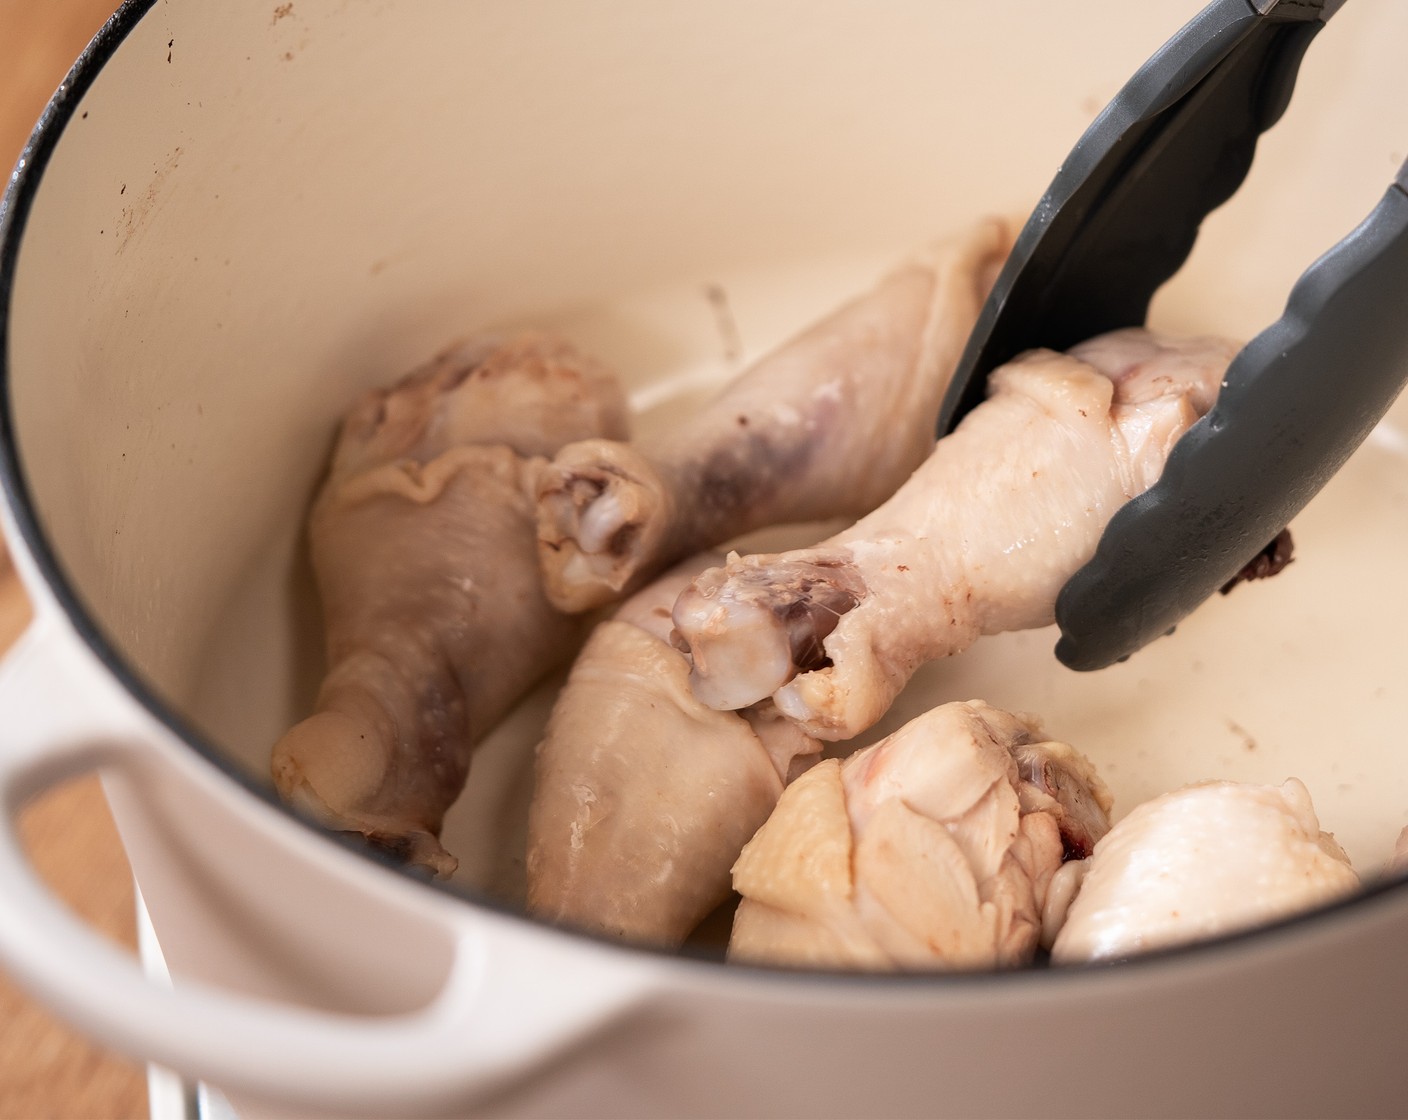 step 4 Use a paper towel to wipe the dutch oven. Bring the chicken back to the dutch oven over the stovetop.